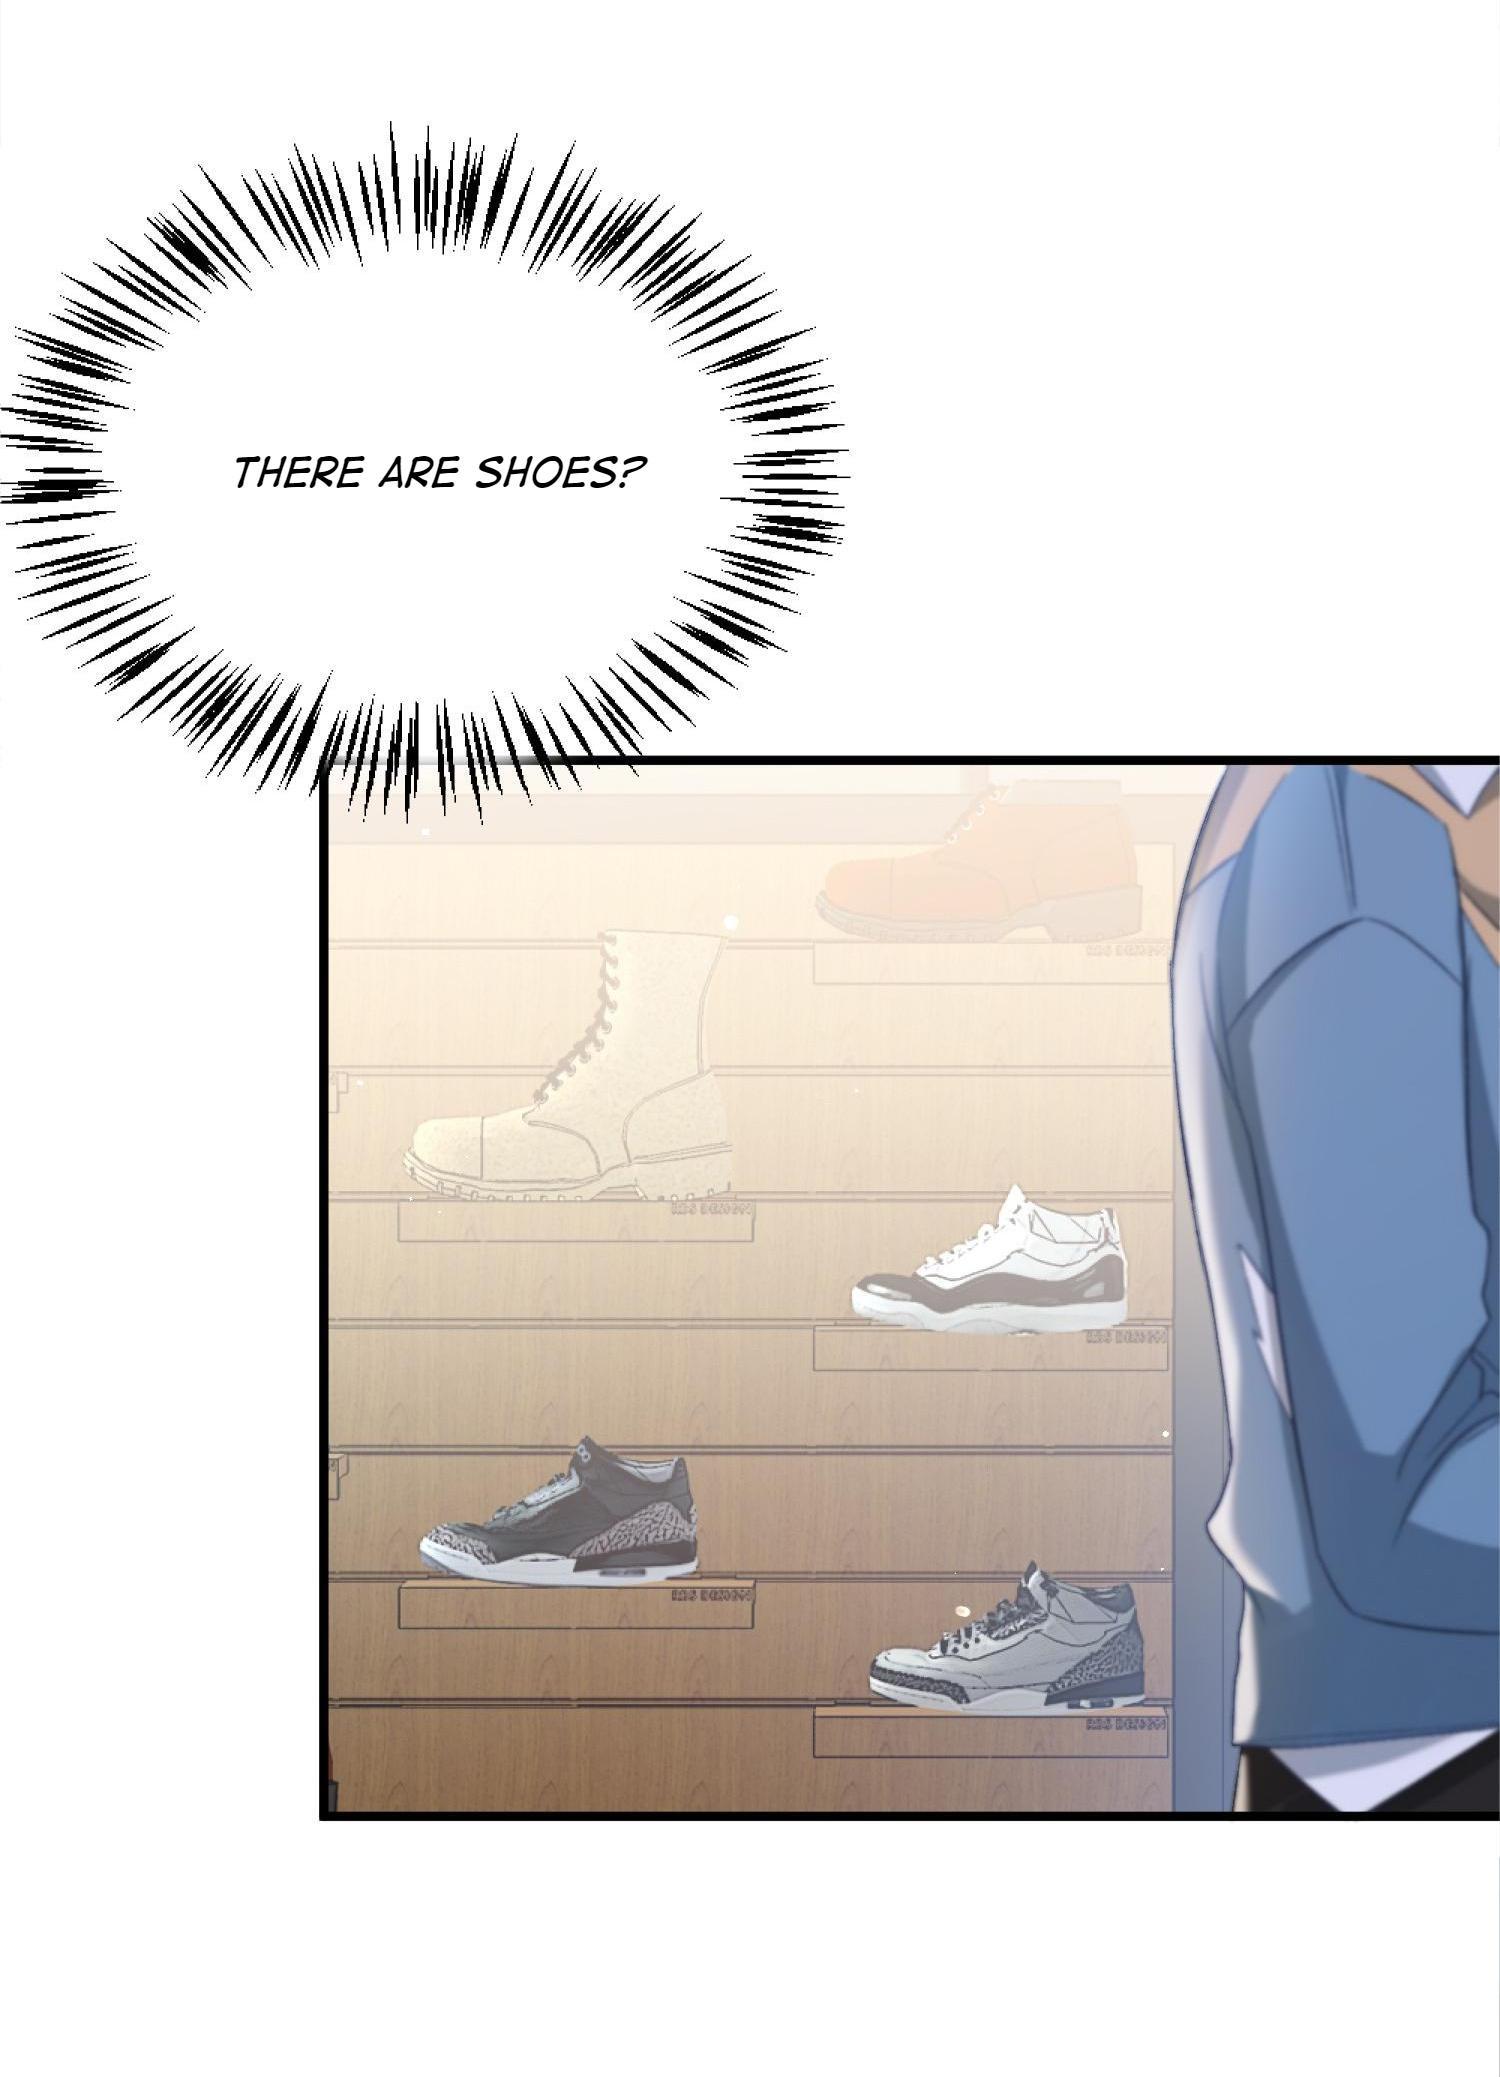 The abyss webtoon shoes